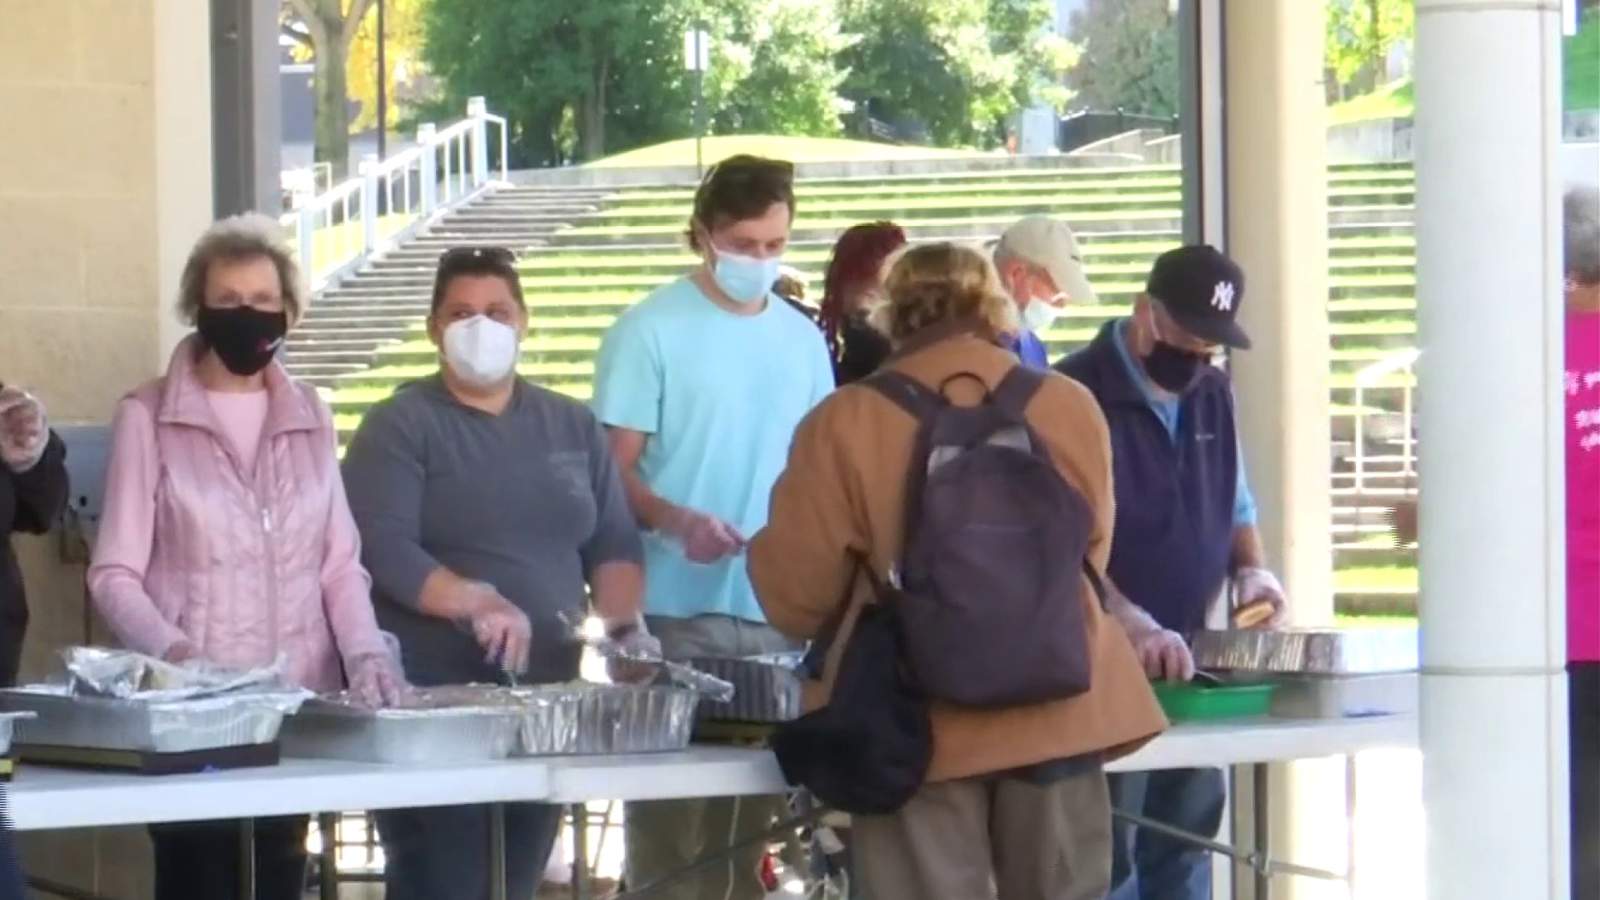 Serving a hot Thanksgiving meal to the homeless in downtown Roanoke